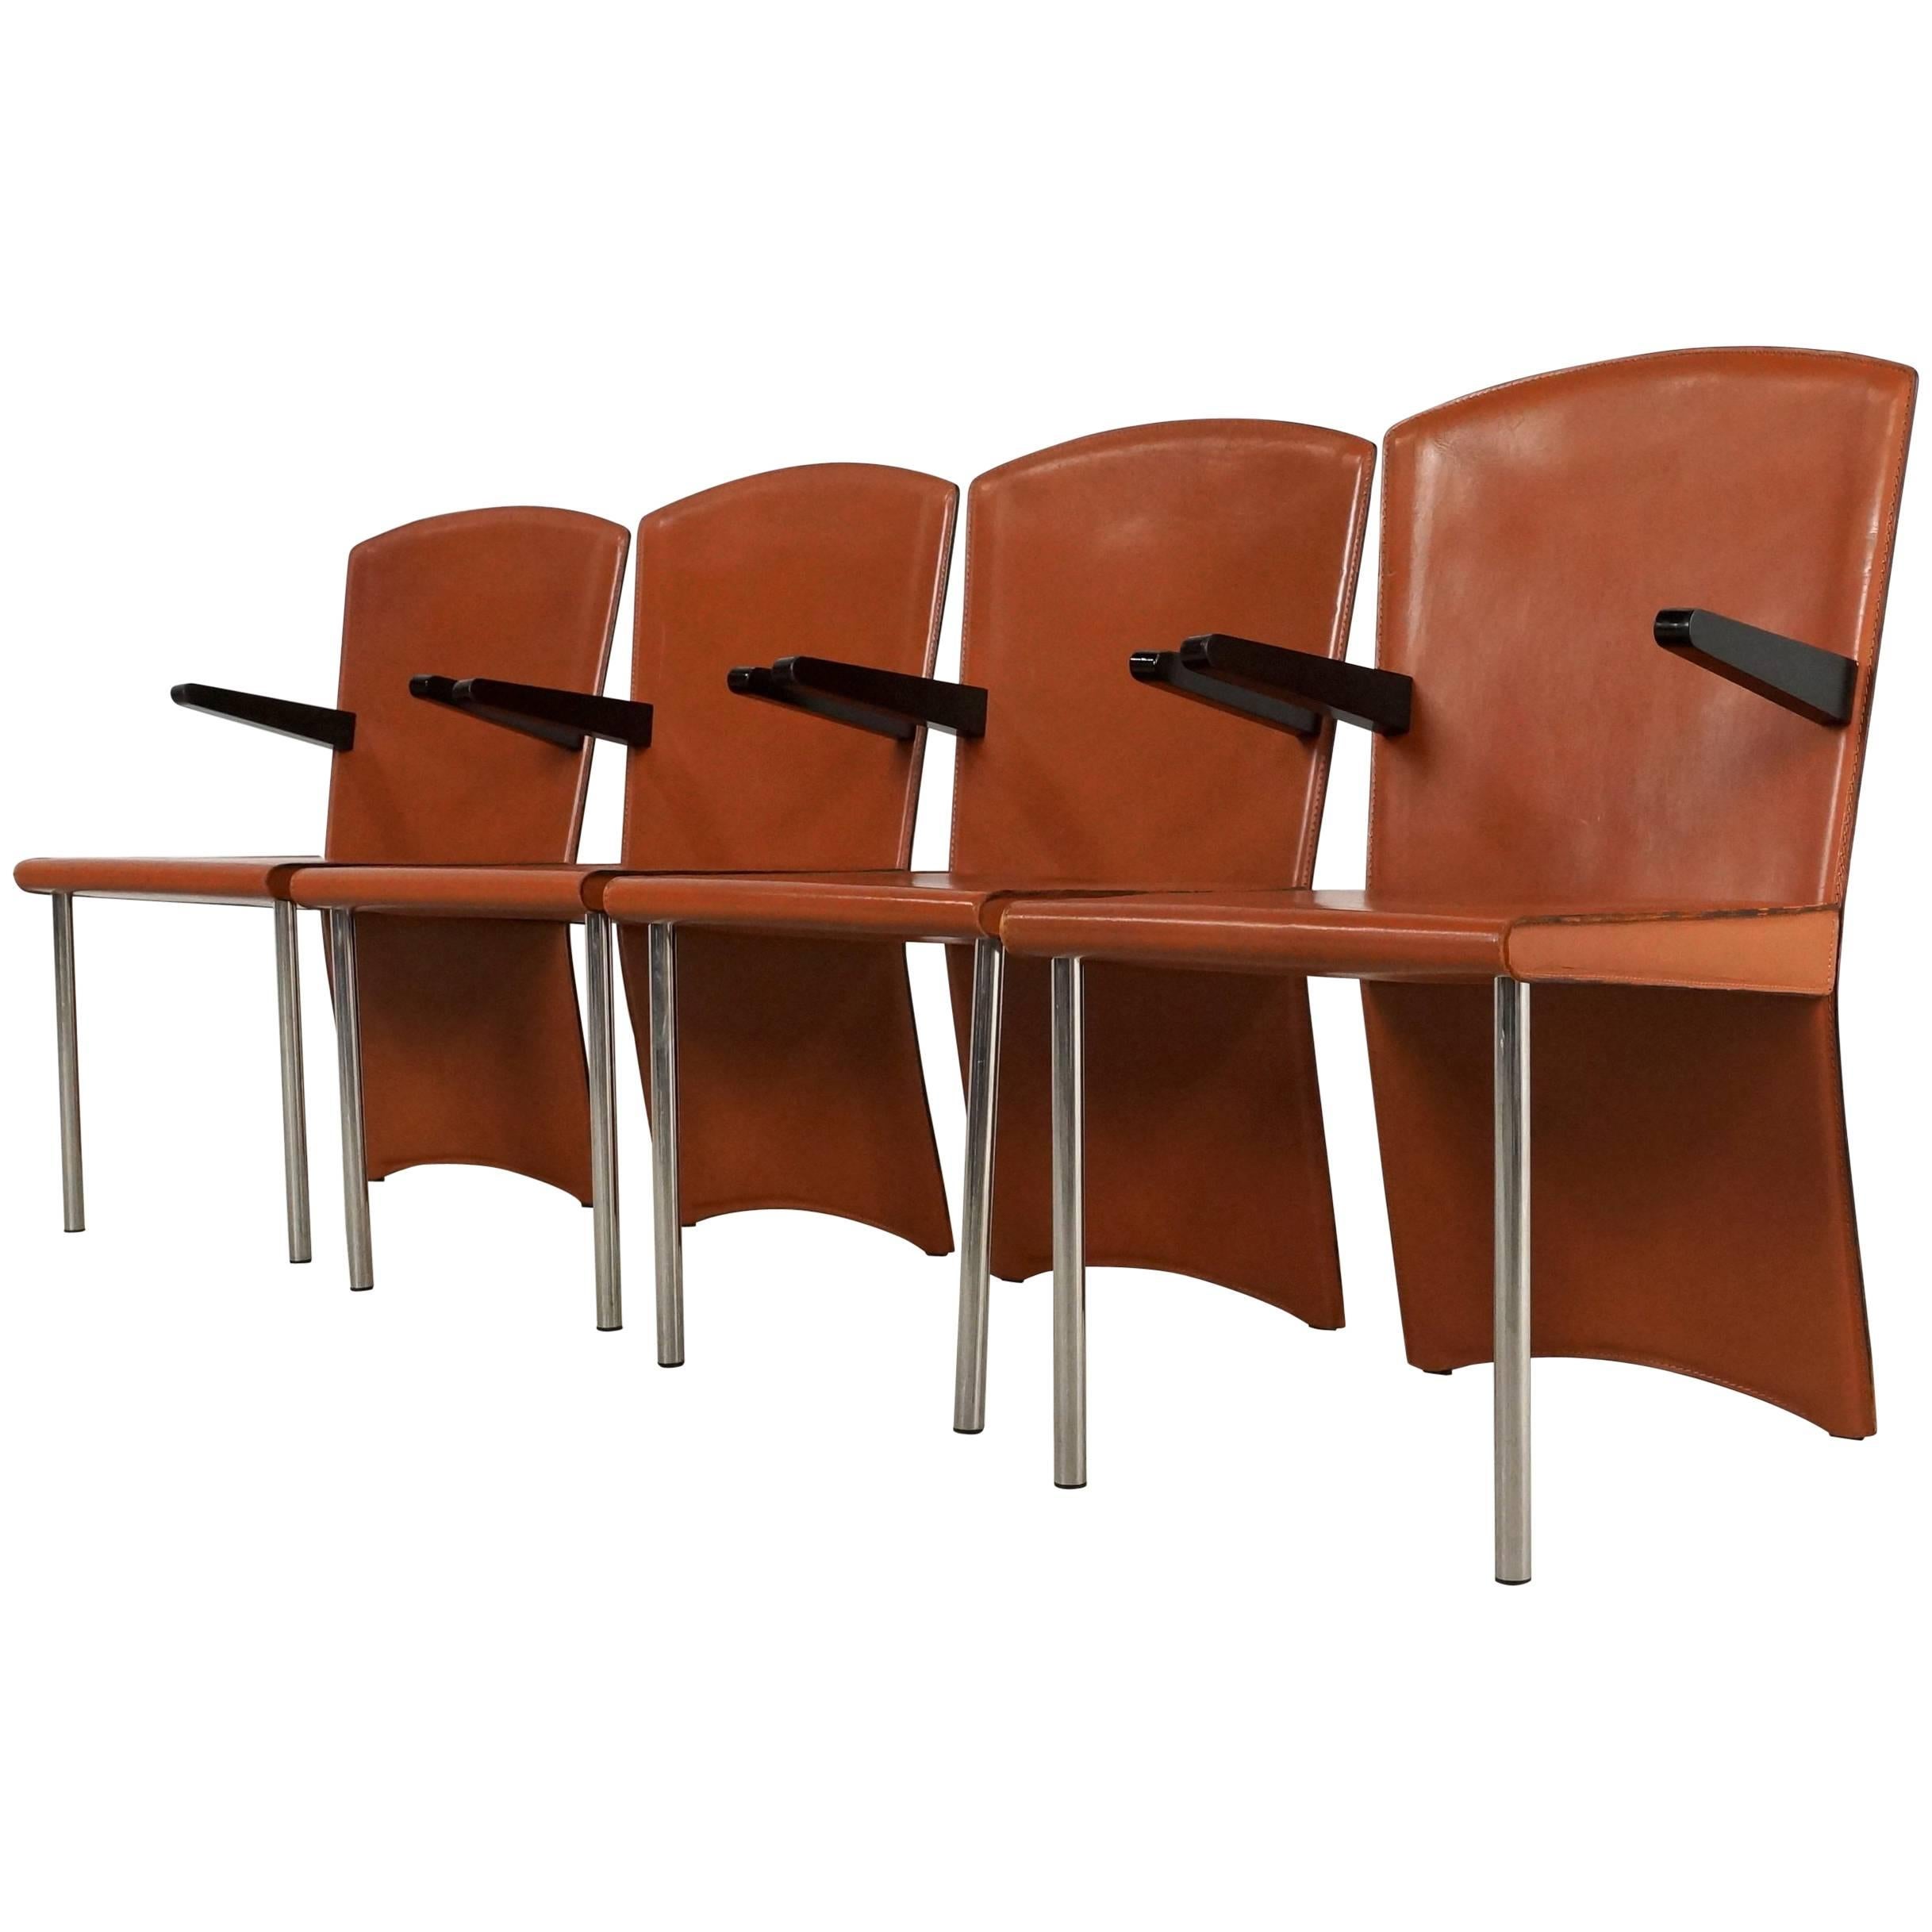 Cognac Leather Dining Chairs by Andrea Branzi for Zanotta, 1980s